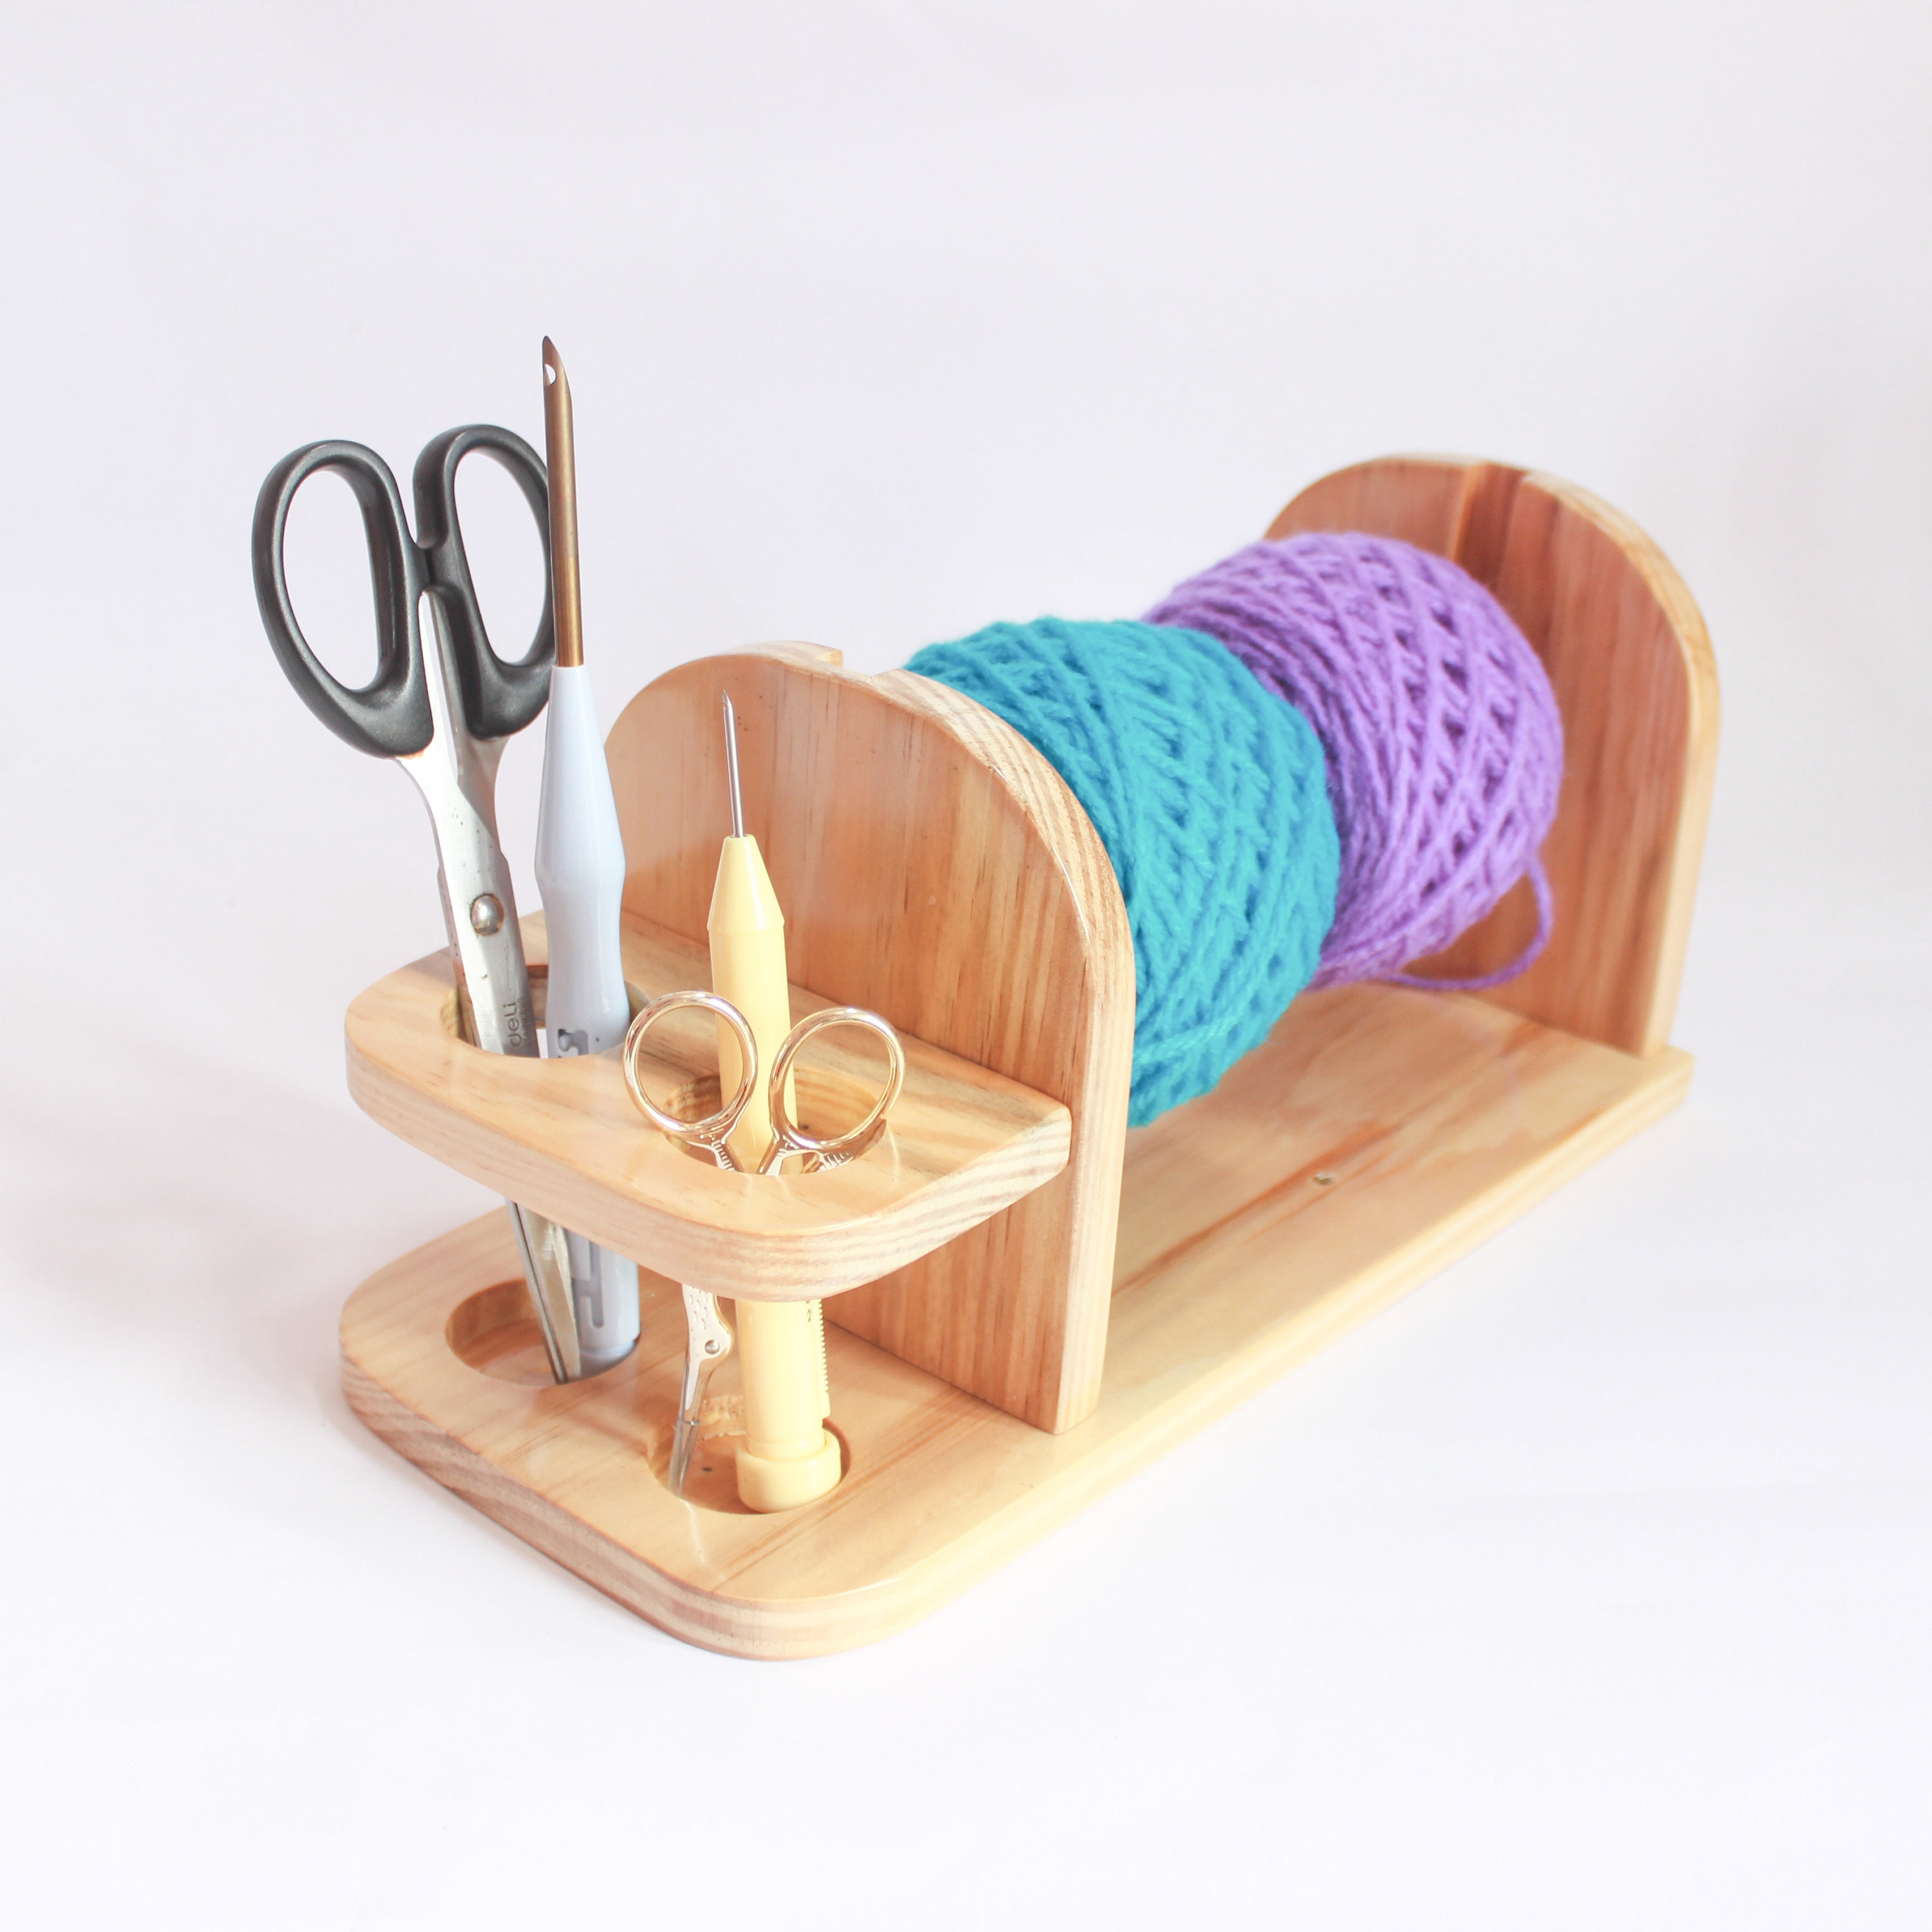 Wood Yarn Holder Portable Wooden Yarn Holder with Wrist Strap Knitting  Crocheting Embroidery Accessories for Hats Cardigans Sock - AliExpress